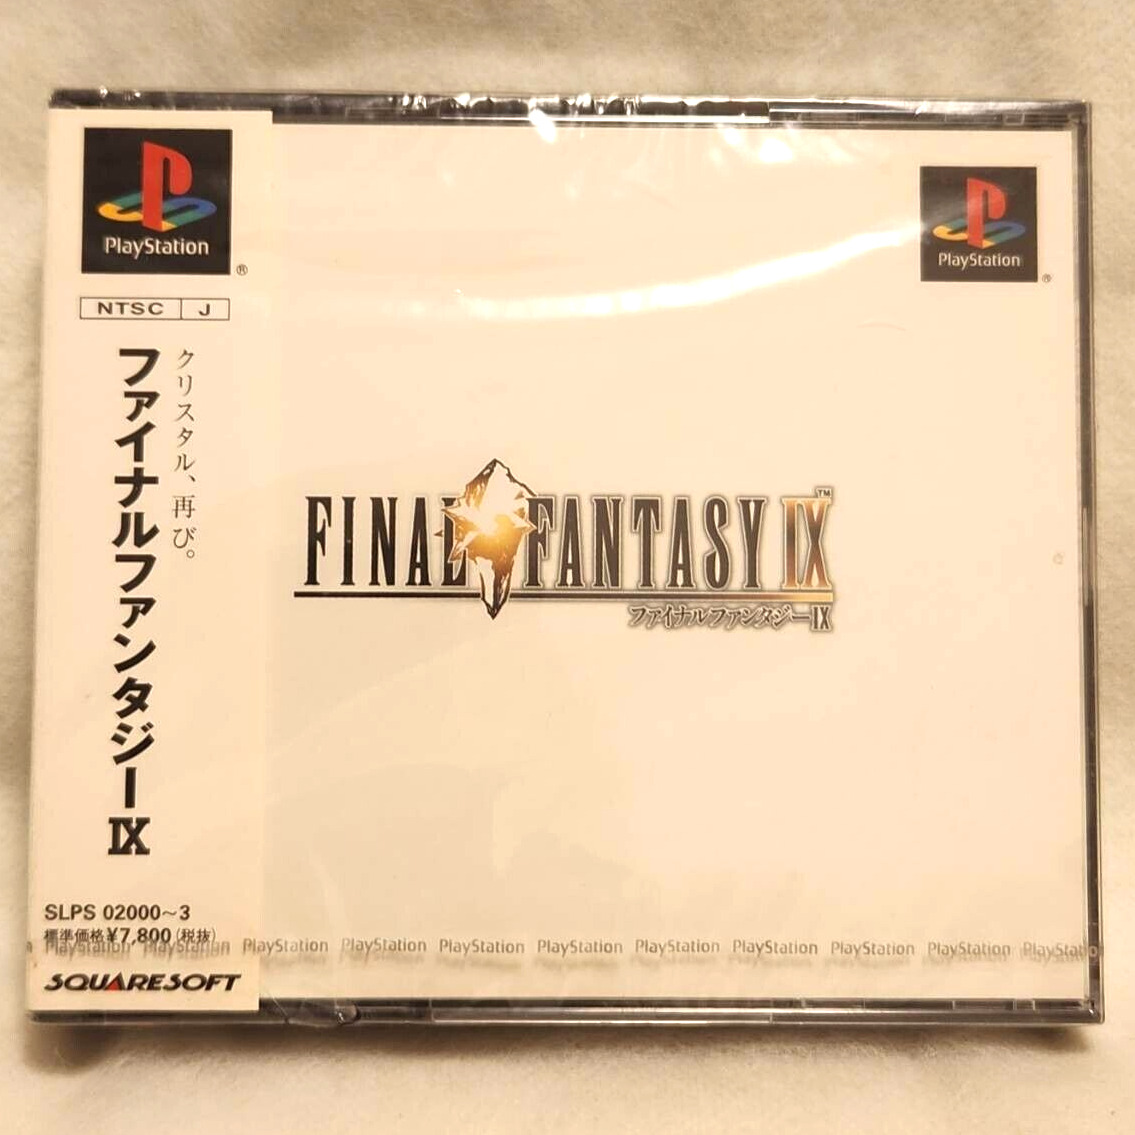 Final Fantasy IX FF 9 SEALED FOR Sony PS1 Playstation Game Soft SEALED Old Stock